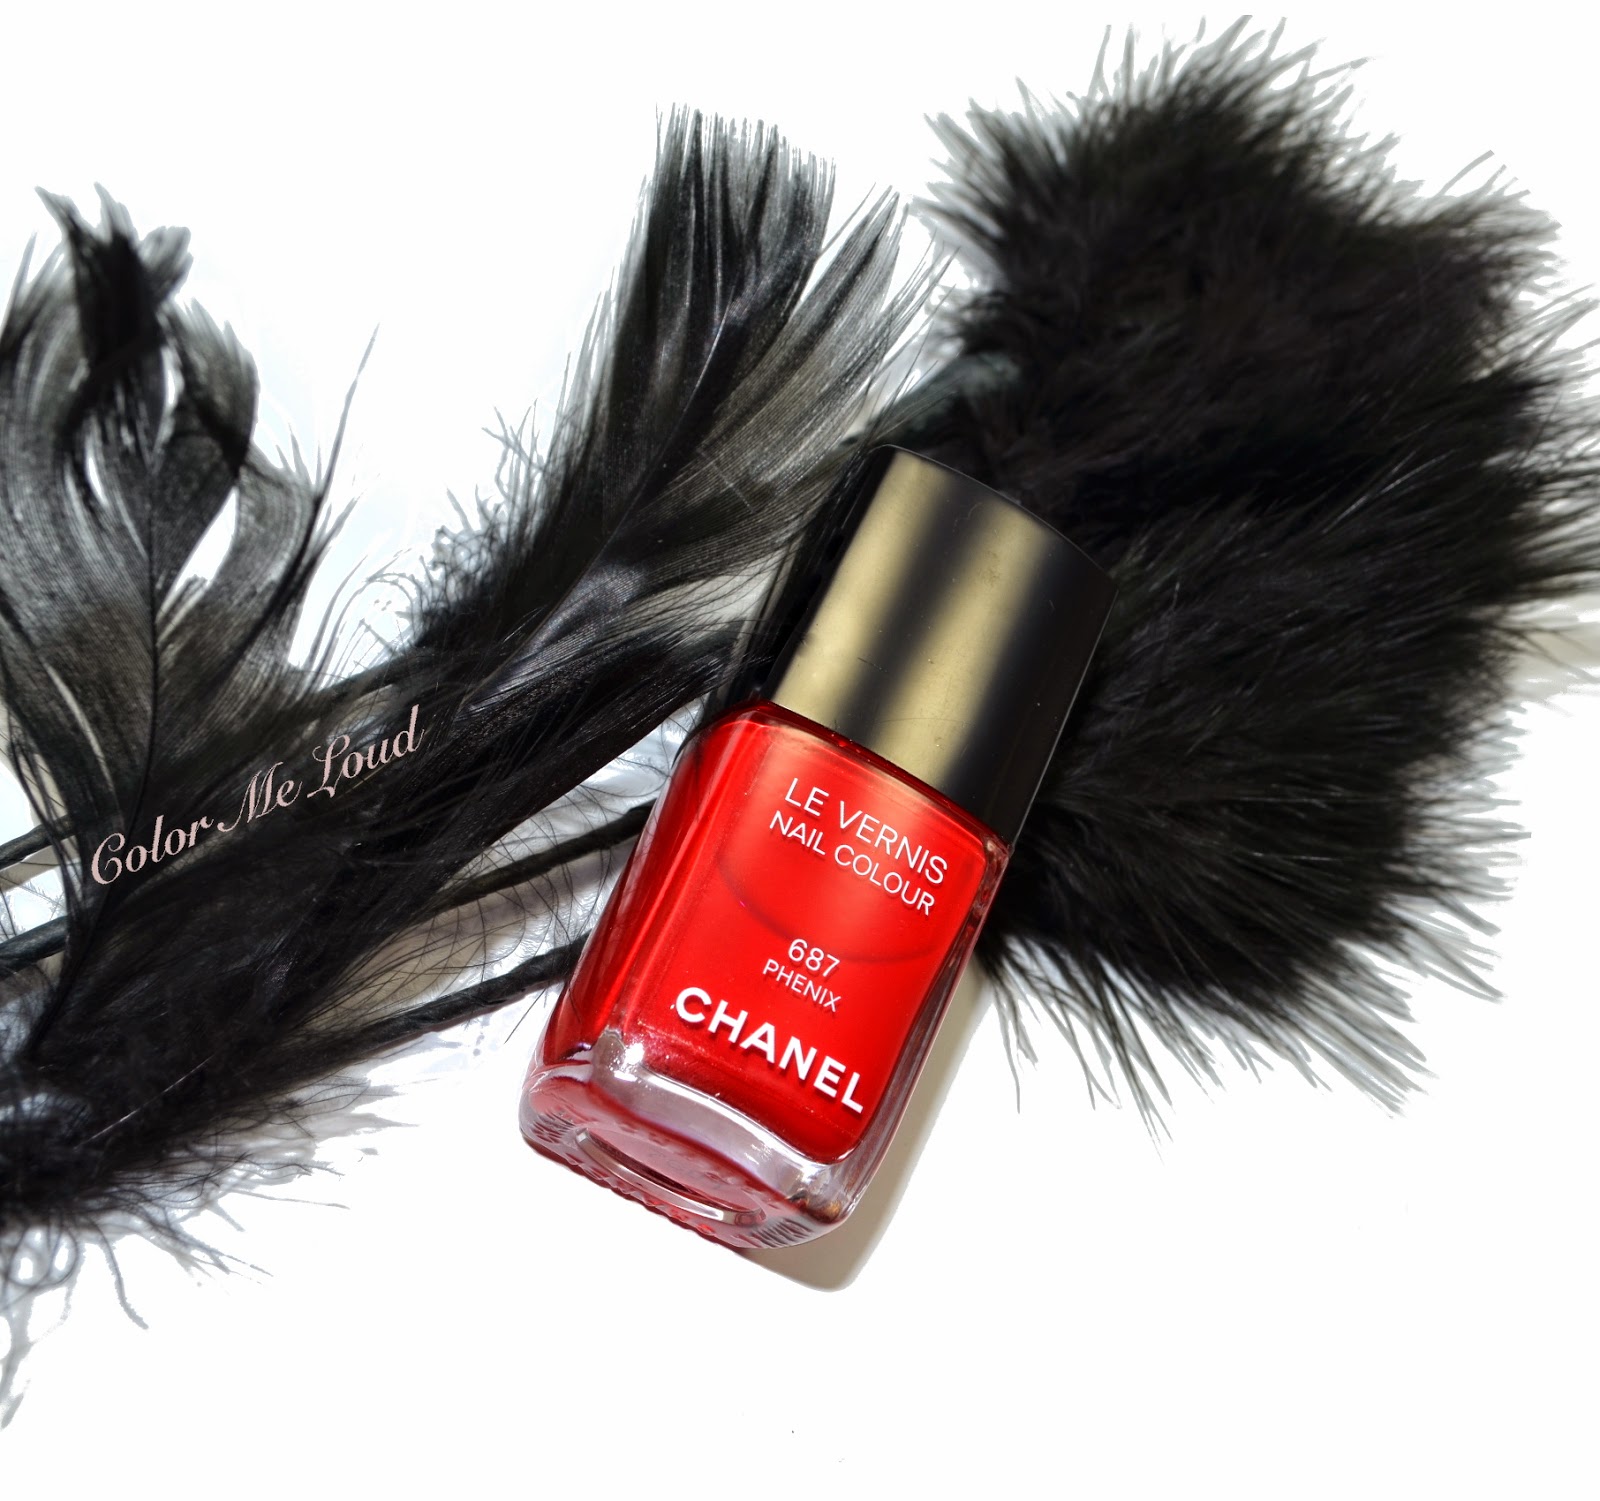 Chanel Le Vernis #687 Phenix for Chanel Plumes Précieuses Holiday 2014 Collection, Review, Swatch & Comparison